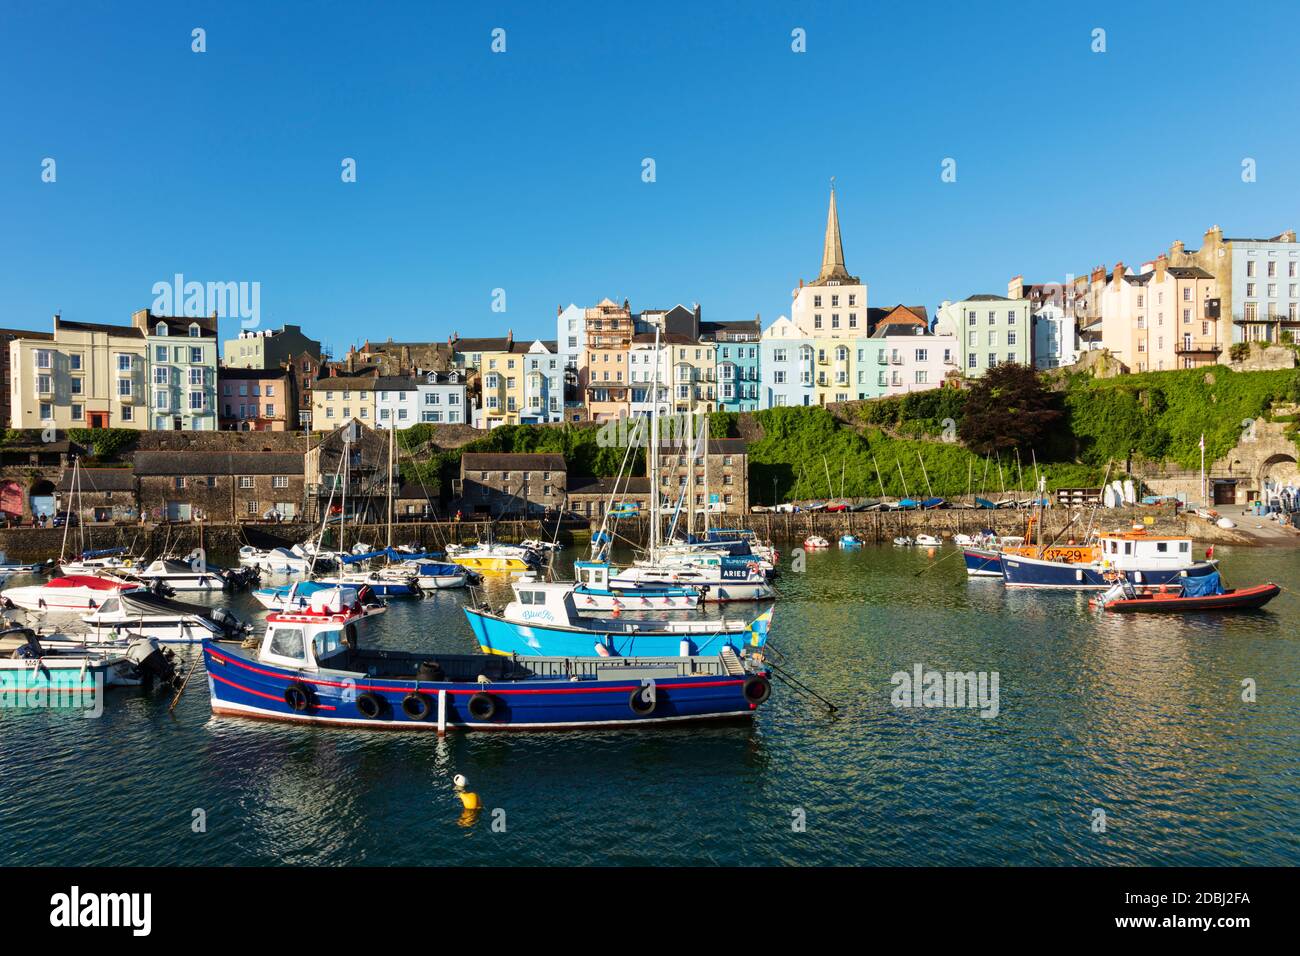 View of the town centre and fishing boats in the harbour, Tenby, Pembrokeshire, Wales, United Kingdom, Europe Stock Photo